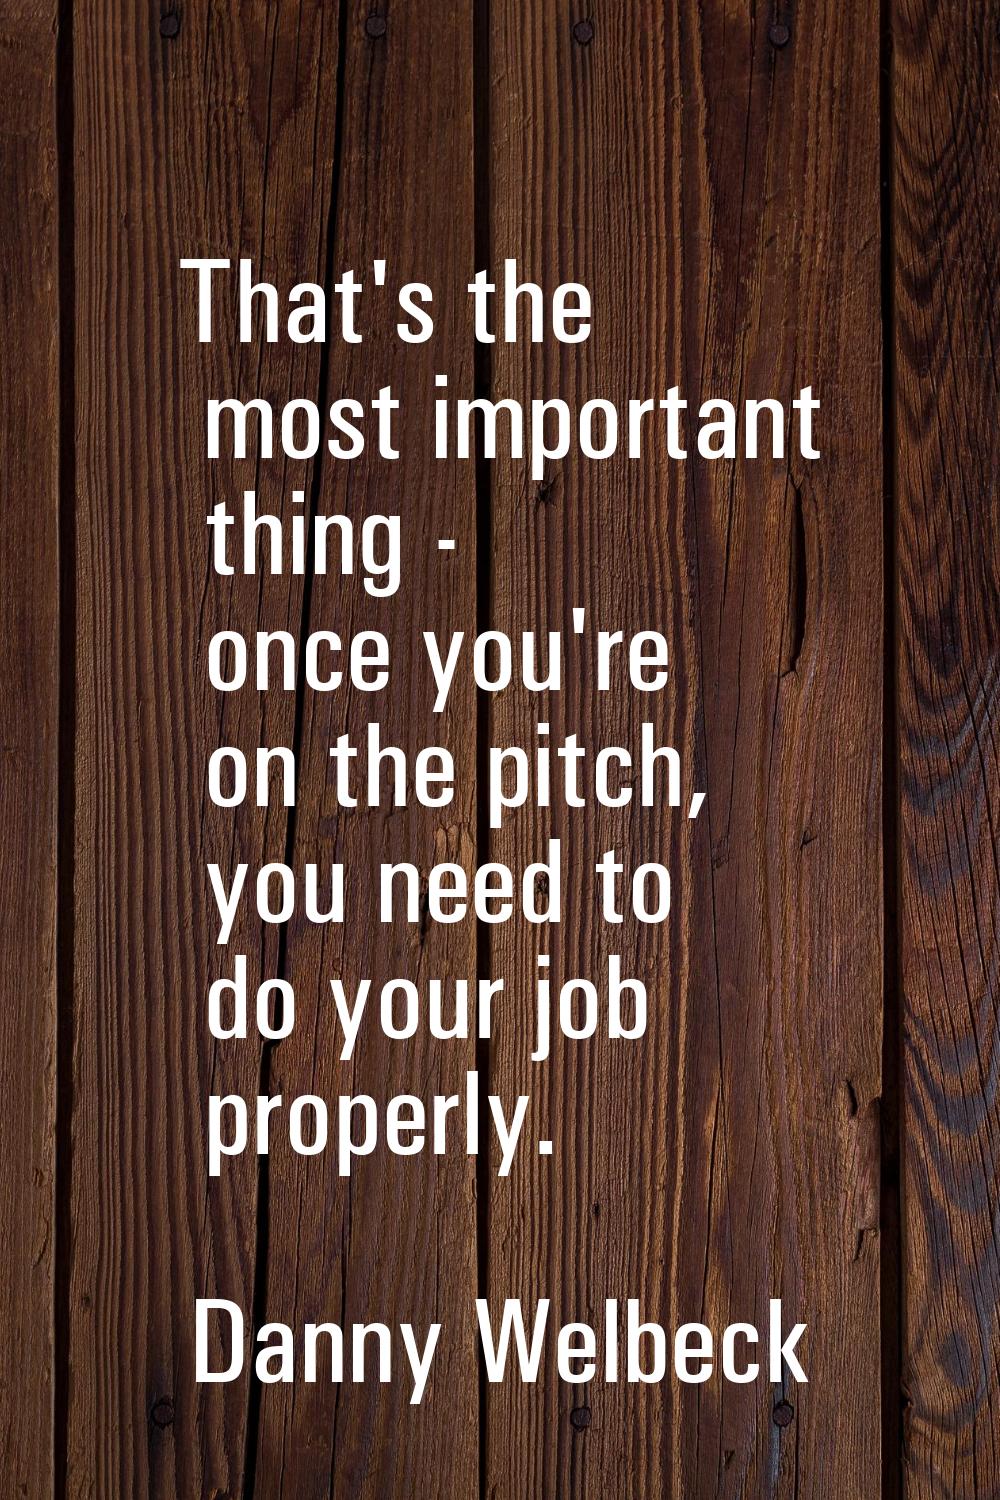 That's the most important thing - once you're on the pitch, you need to do your job properly.